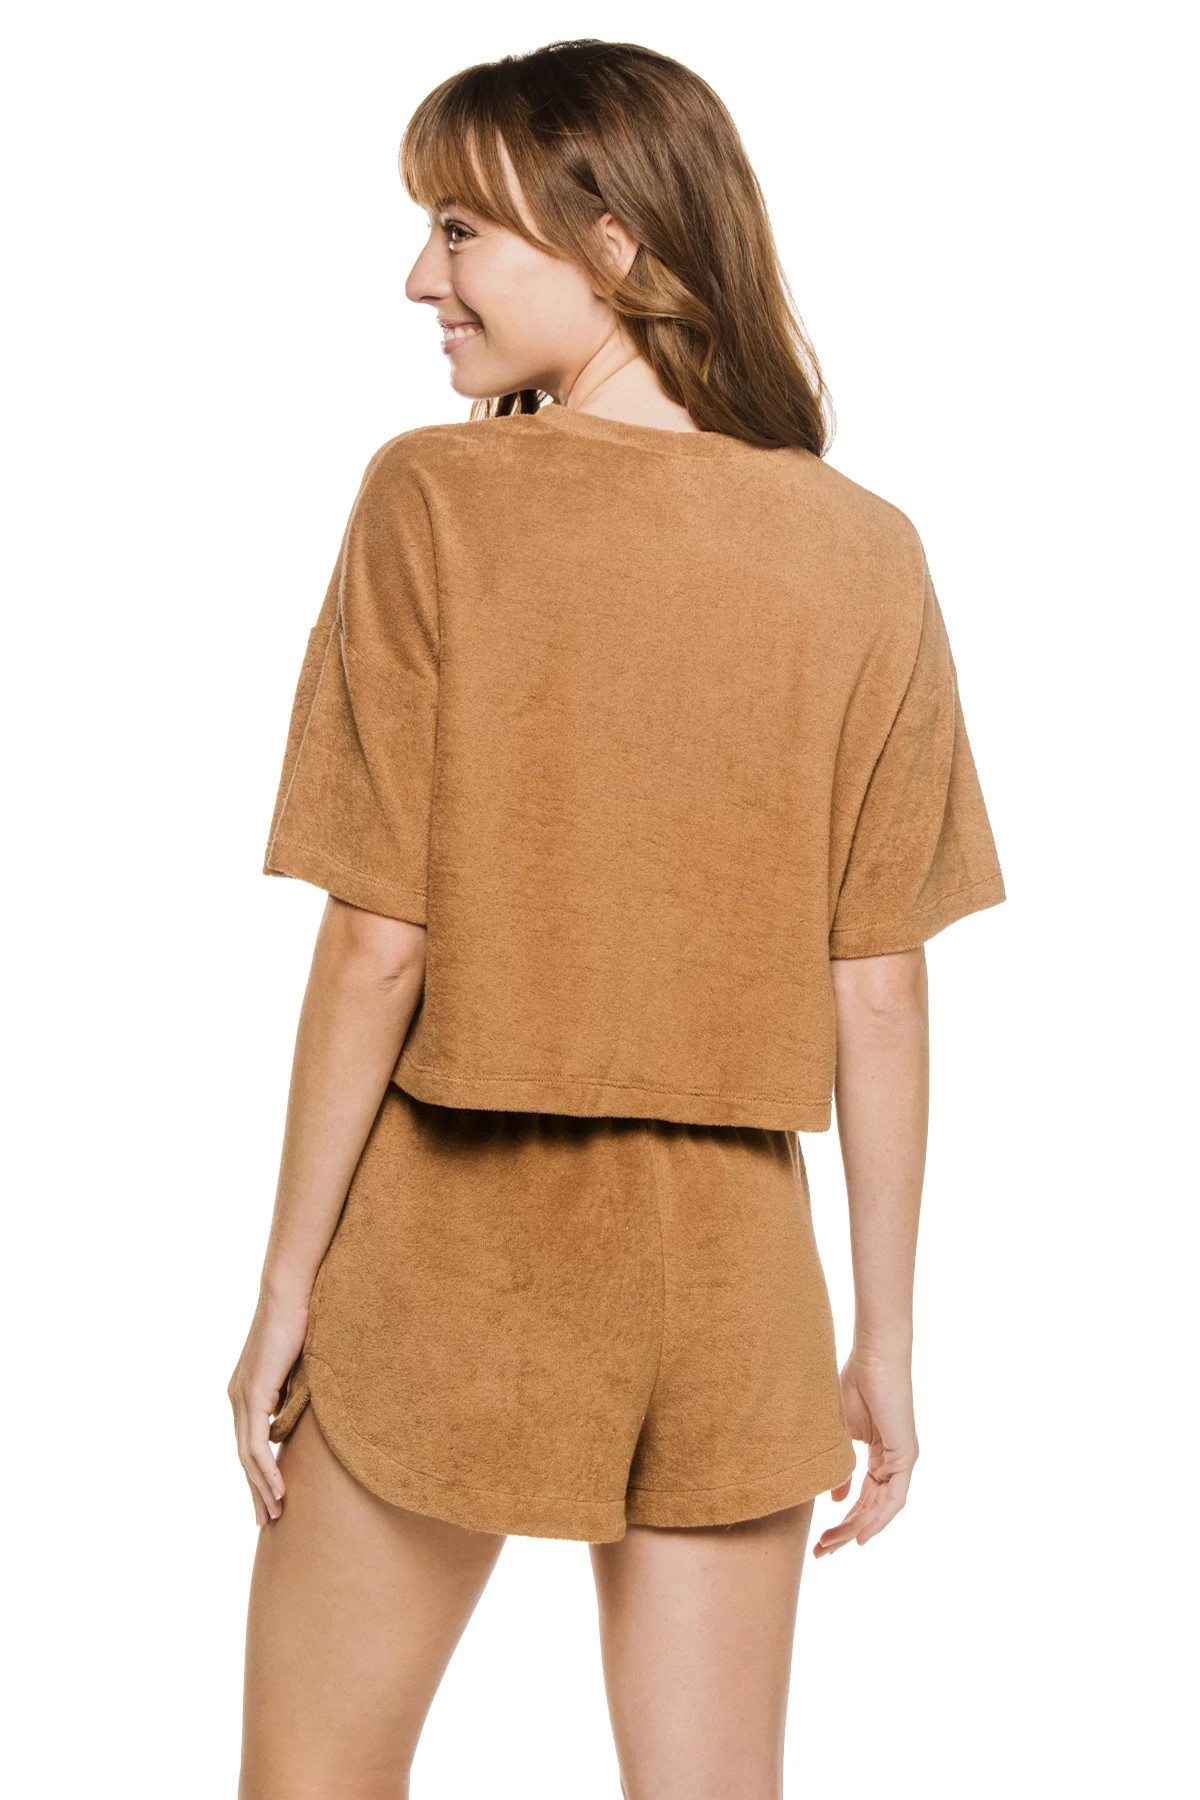 TAN Terry Short Sleeve T-Shirt image number 2